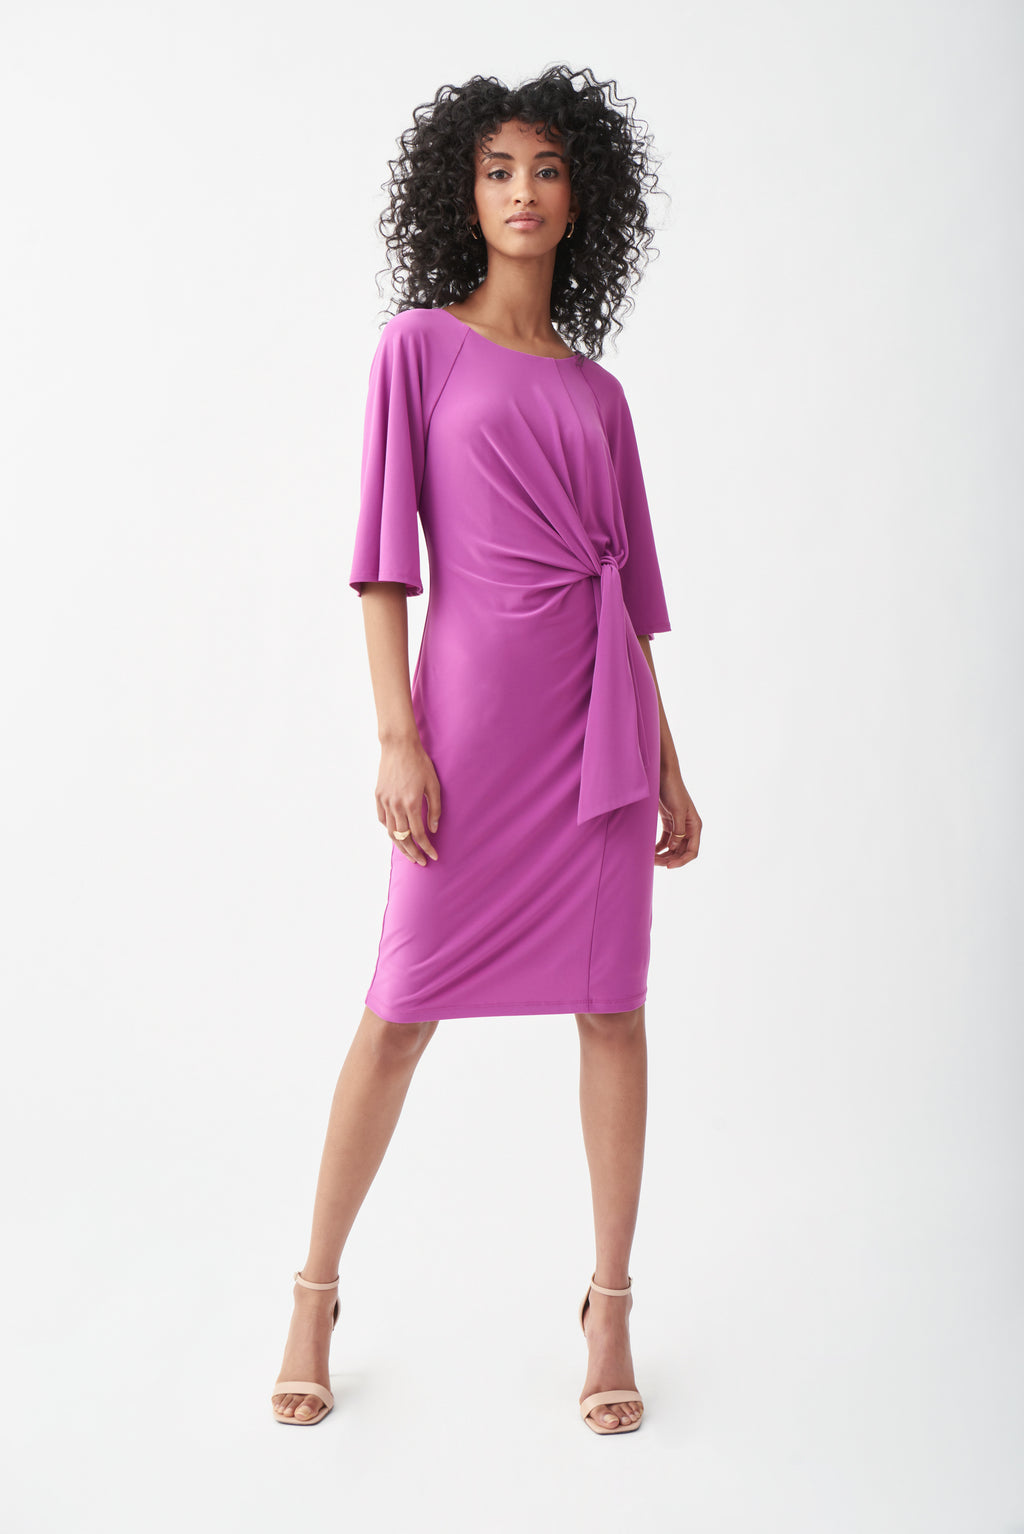 Joseph Ribkoff Grape Silky Knit Sheath Dress With Front Tied Draping And 3/4 Lenghth Bell Sleeves. Back Zipper Closure, Lined.